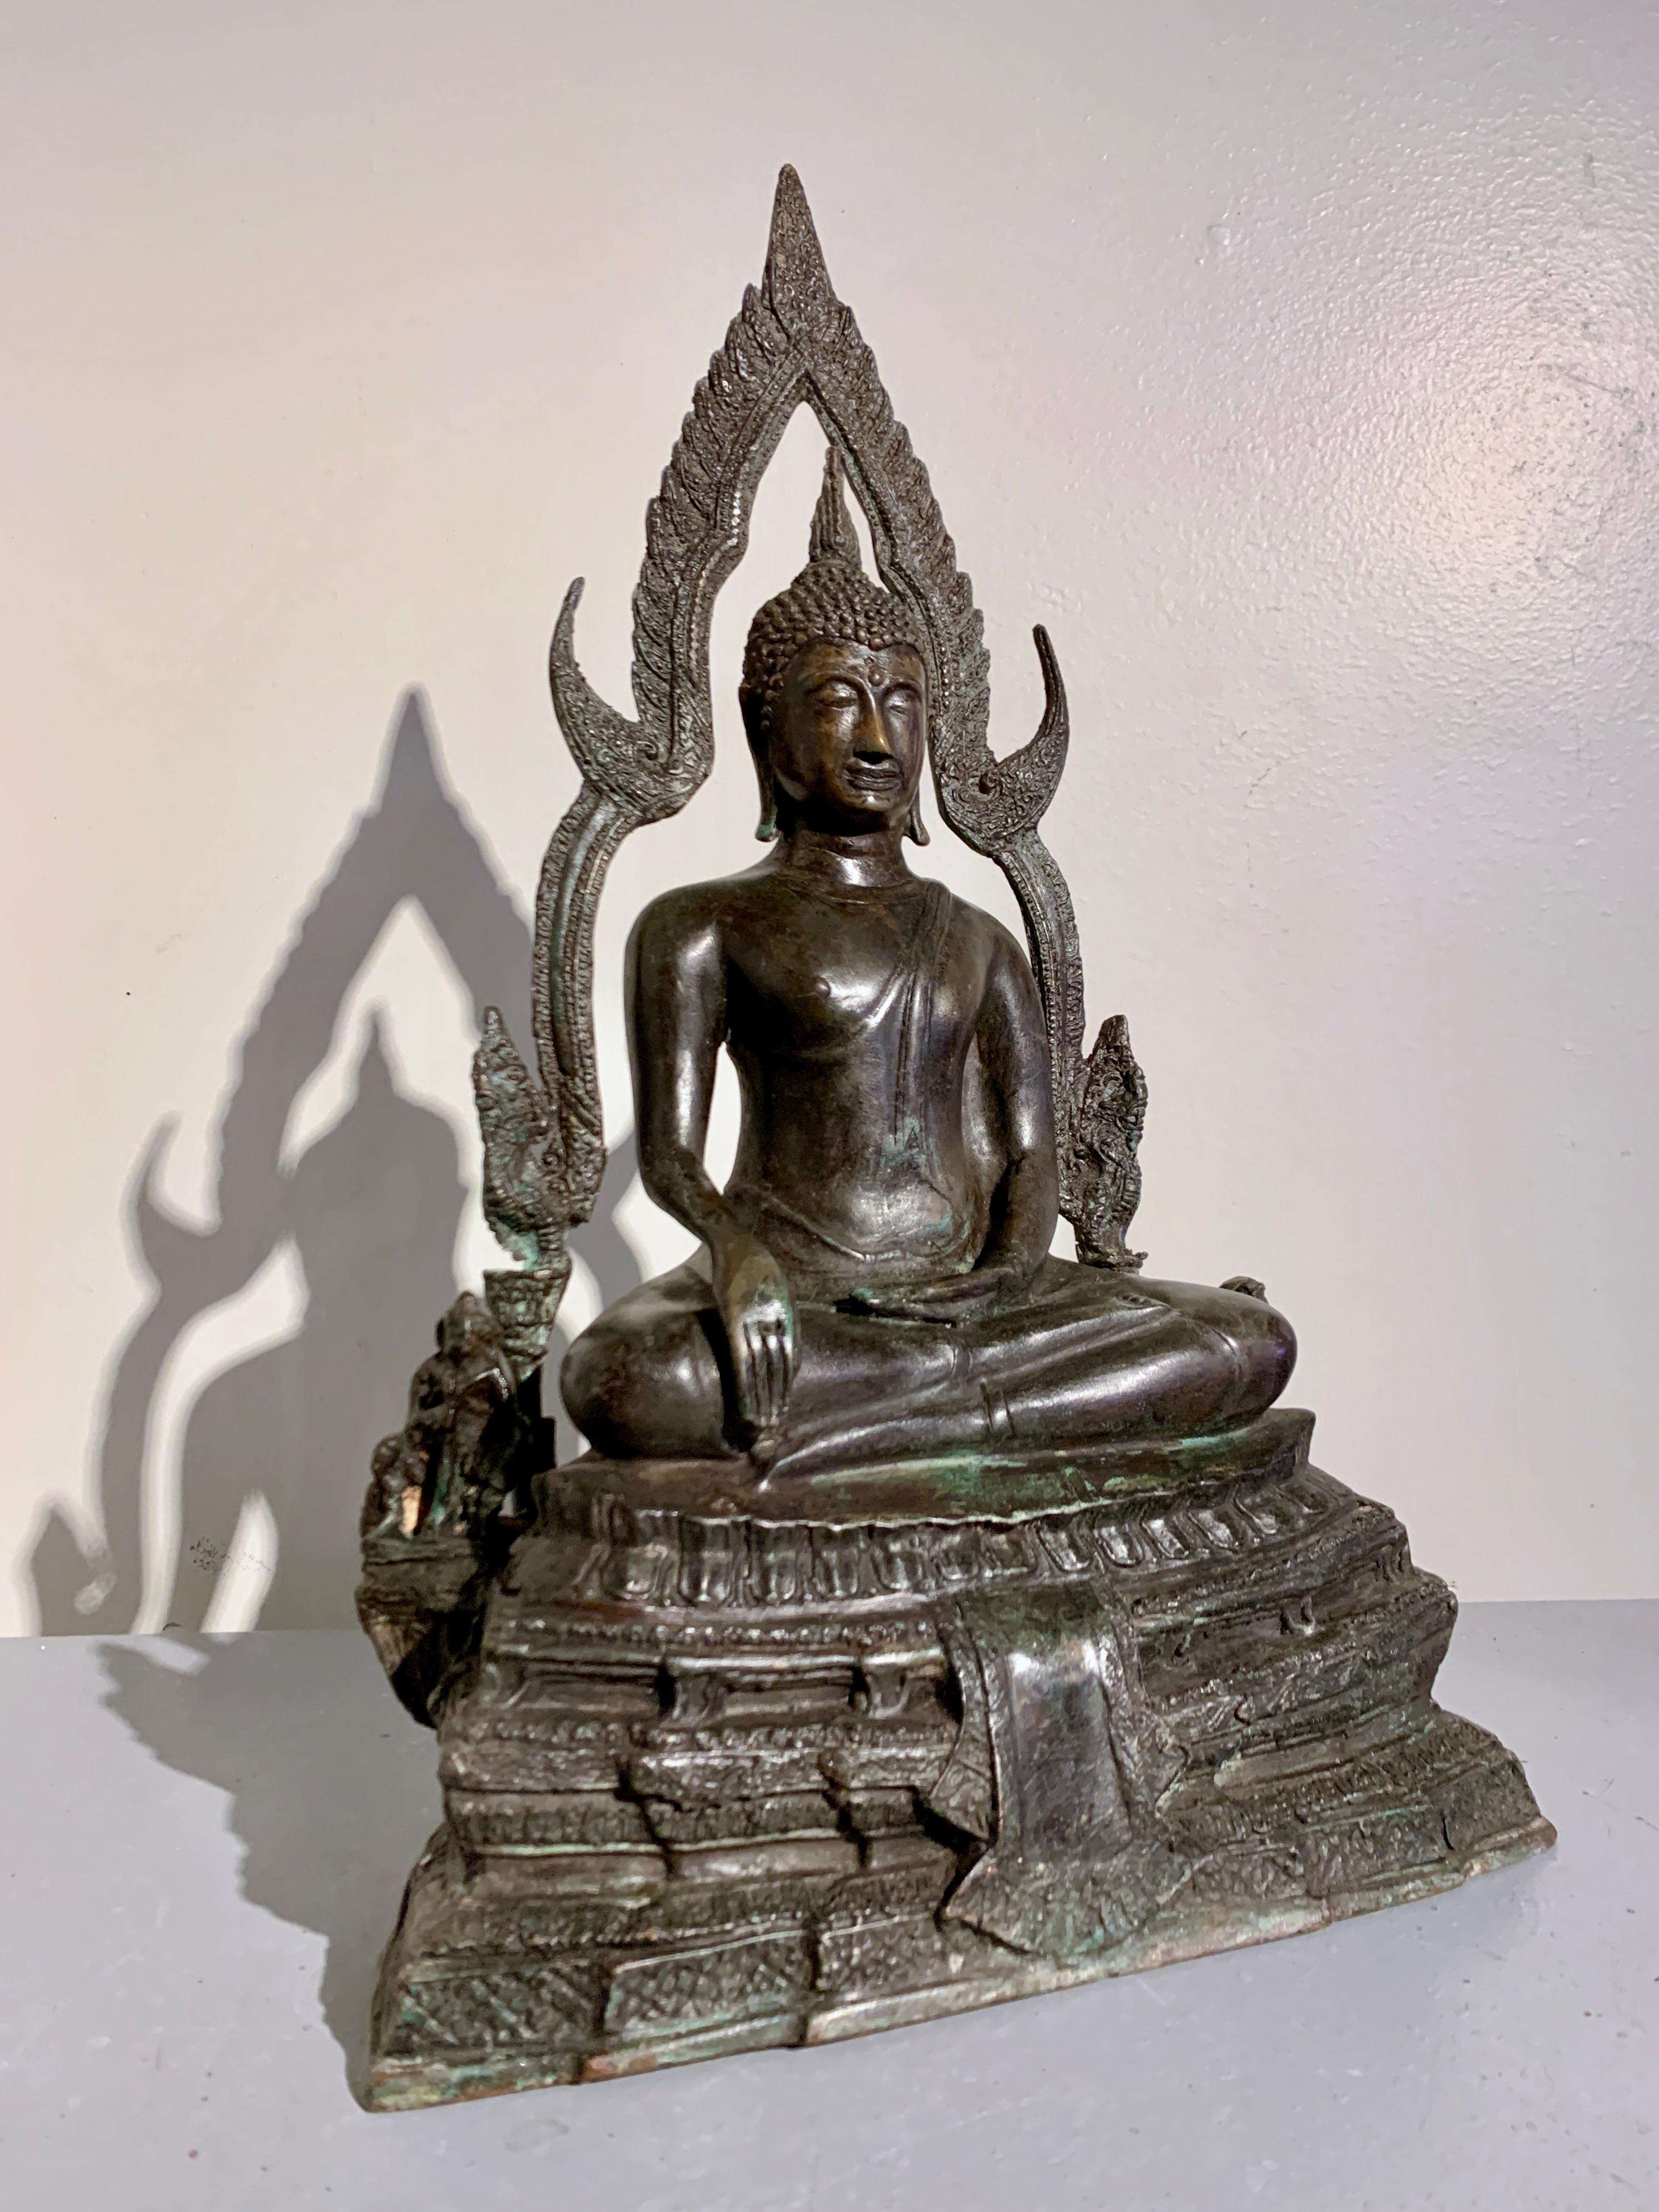 A well cast smaller scale bronze reproduction of the famous golden Buddha known as Para Puttha Chinnarat, housed at Wat Phra Si Rattana Mahathat, mid 20th century, Thailand.

A faithfully cast reproduction of the renowned Thai seated Buddha known as